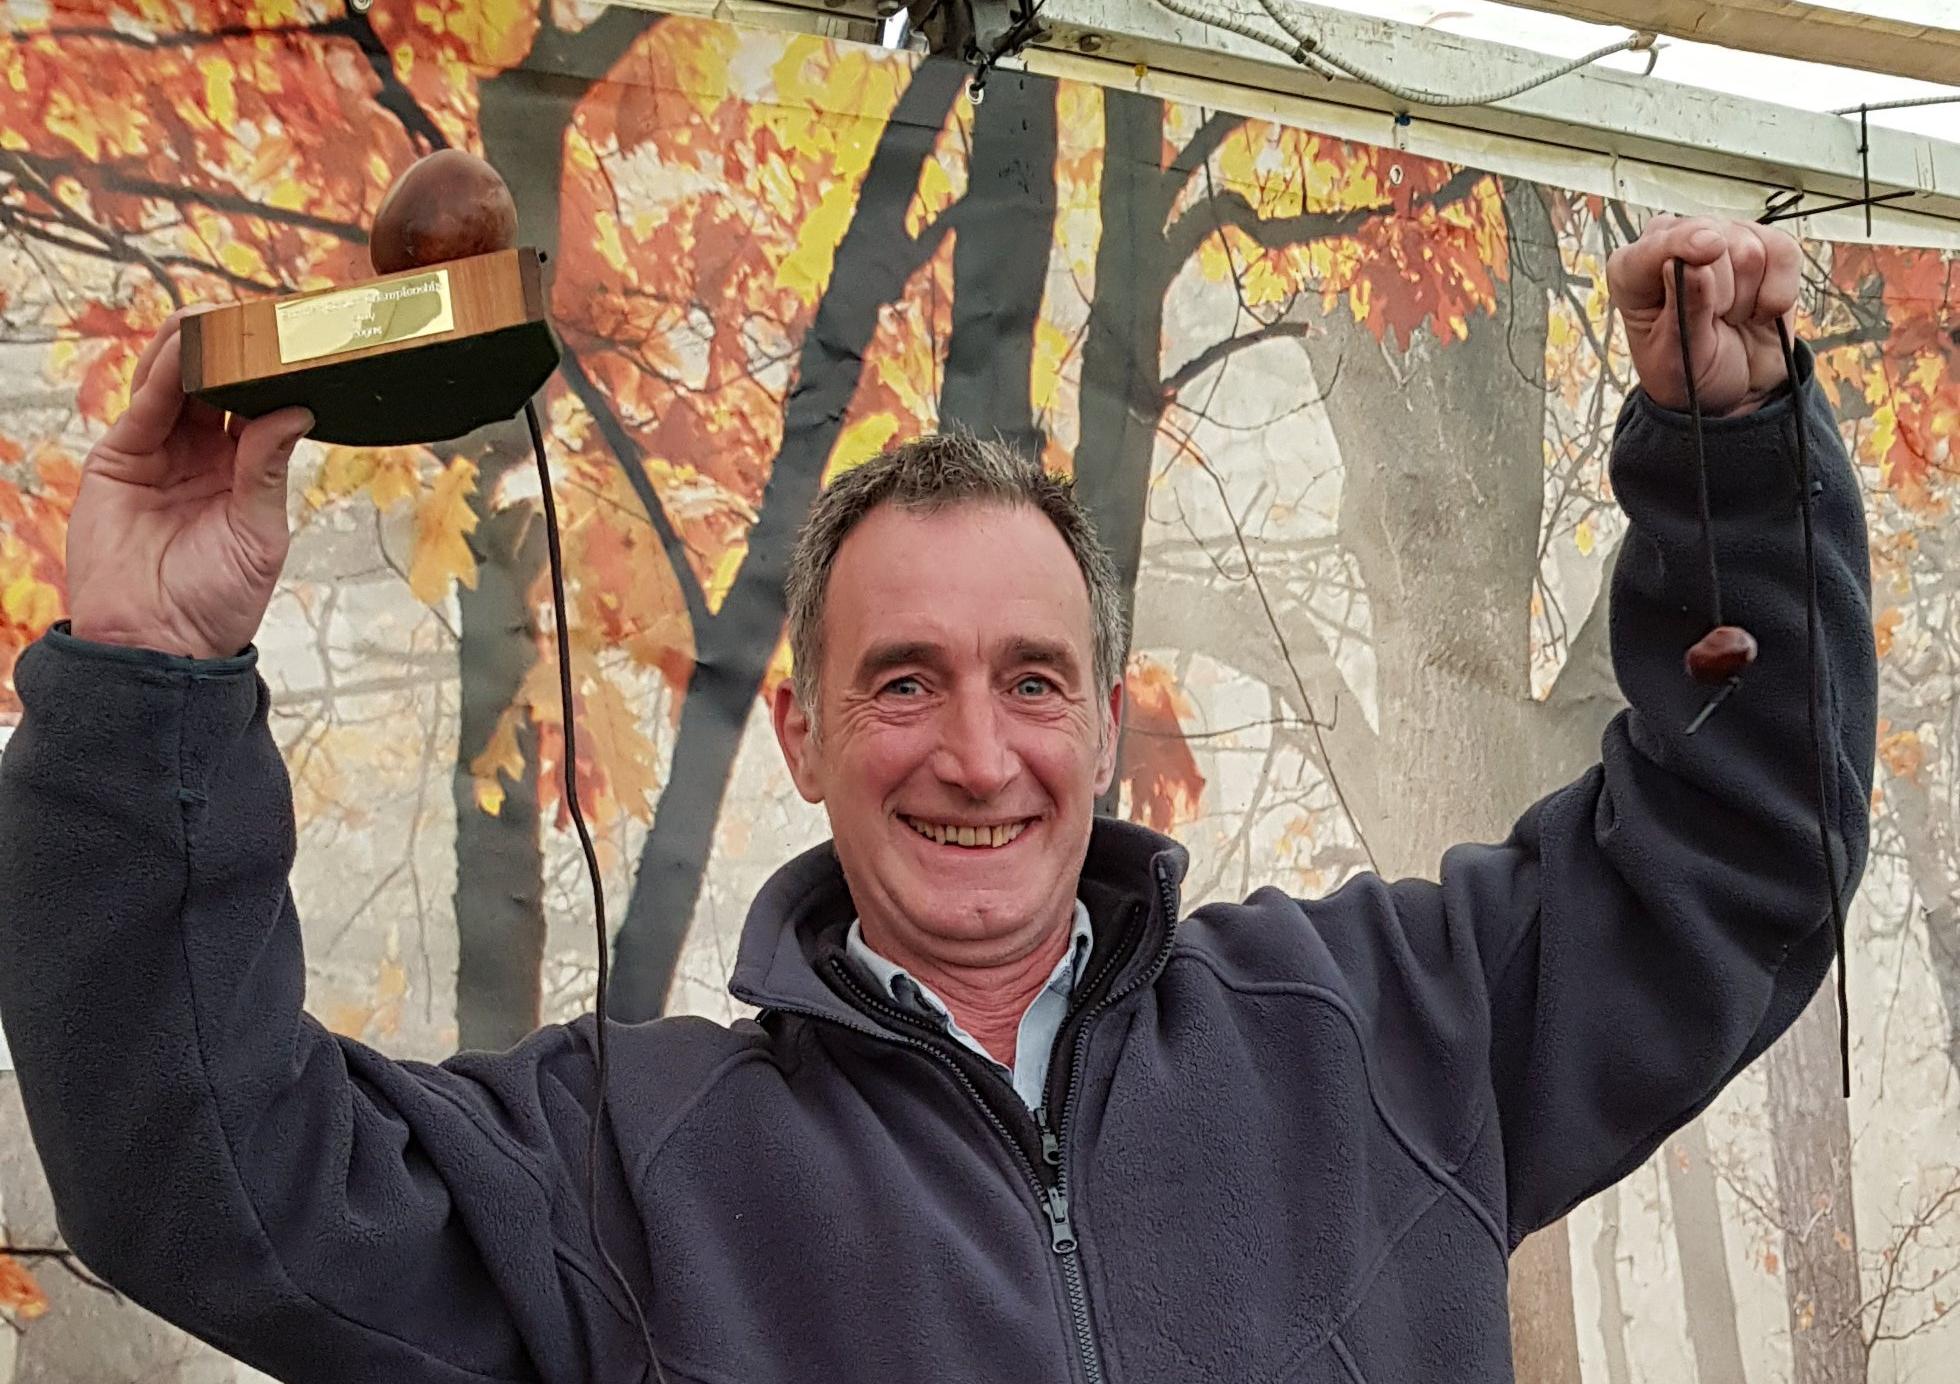 Douglas Scott won the "Rogue" section of the Scottish Conker Championship at Peebles on Saturday.